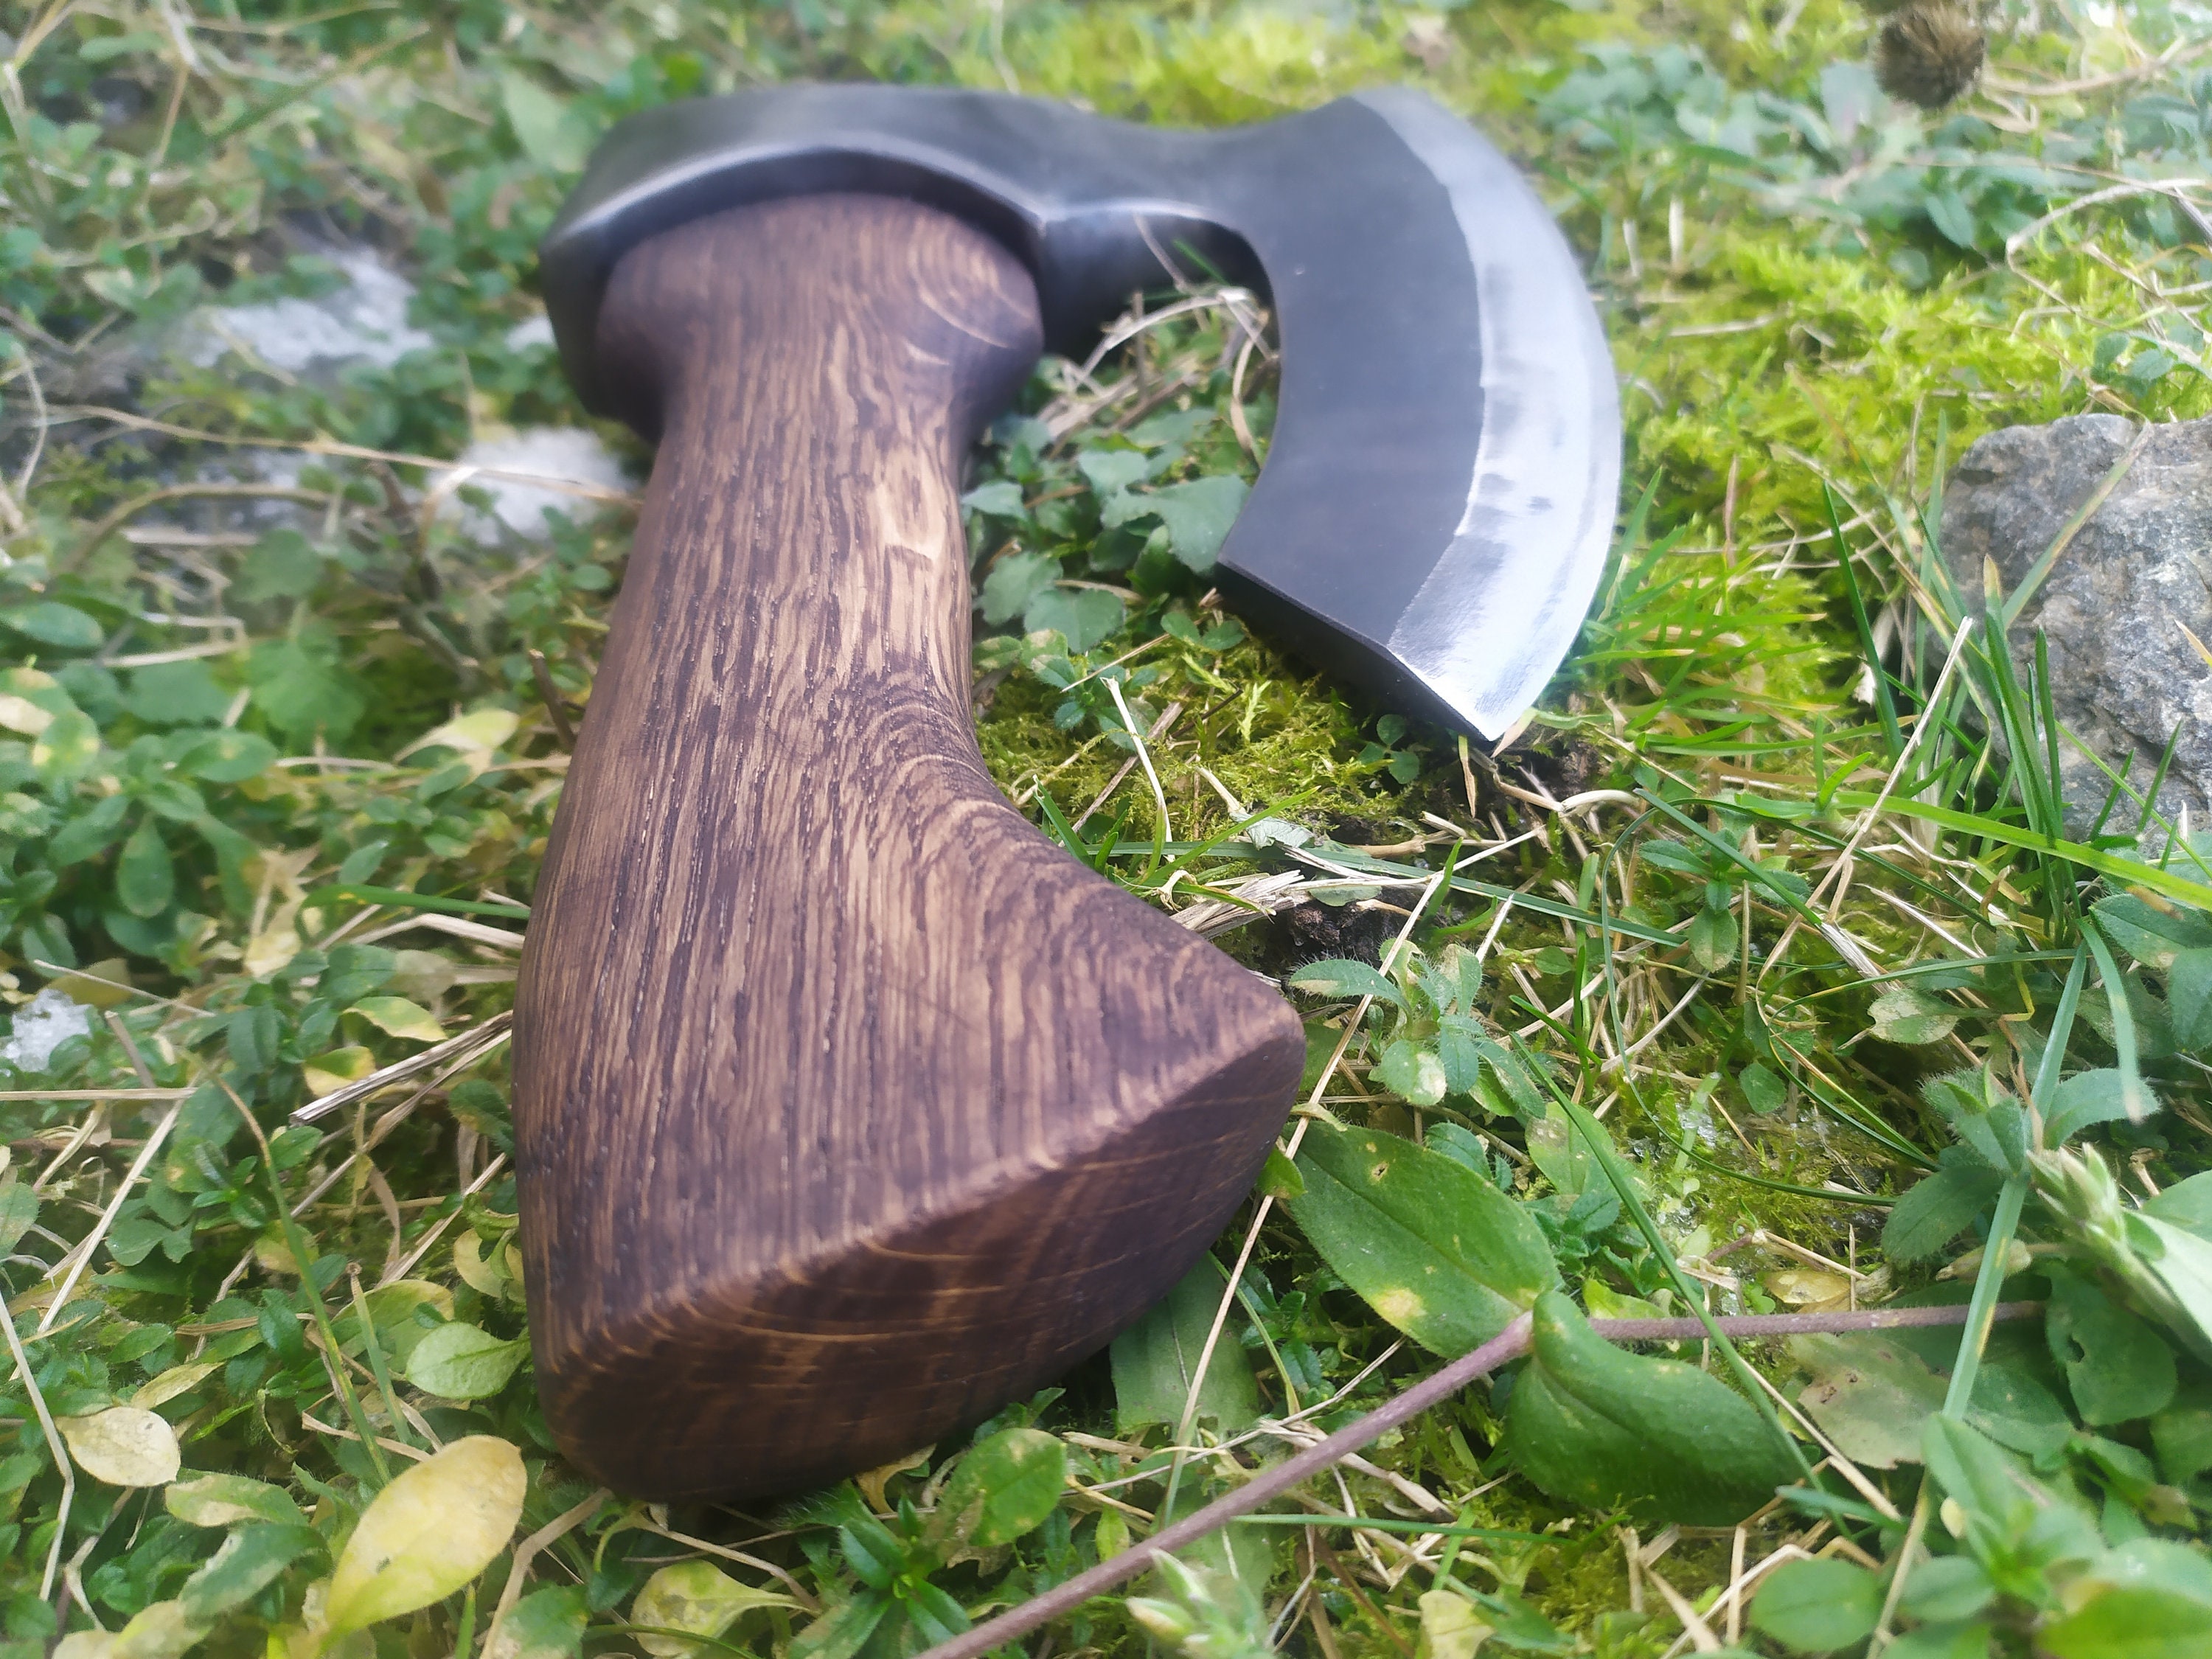 Kitchen Bearded Axe for Shredding, Cutting, Cooking Hand Forged Original  Kitchen Gift 